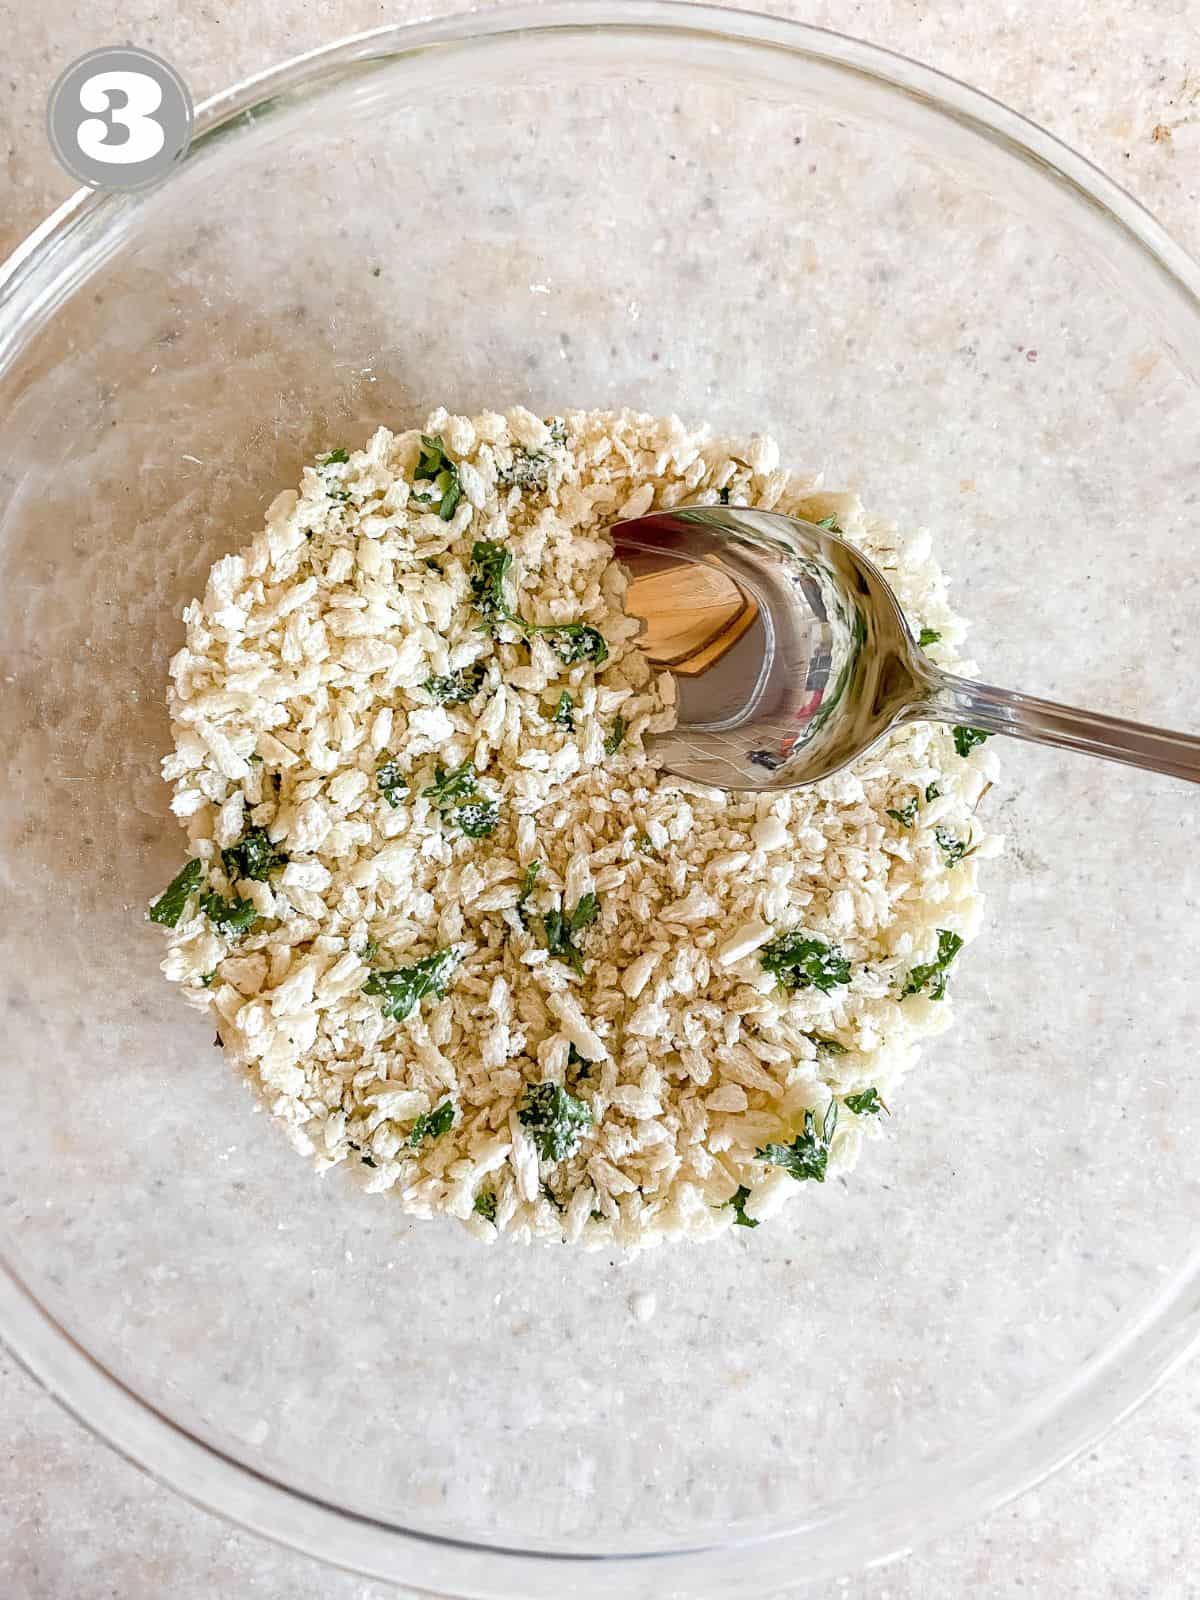 panko breadcrumbs and herbs being stirred by a spoon in a glass bowl.